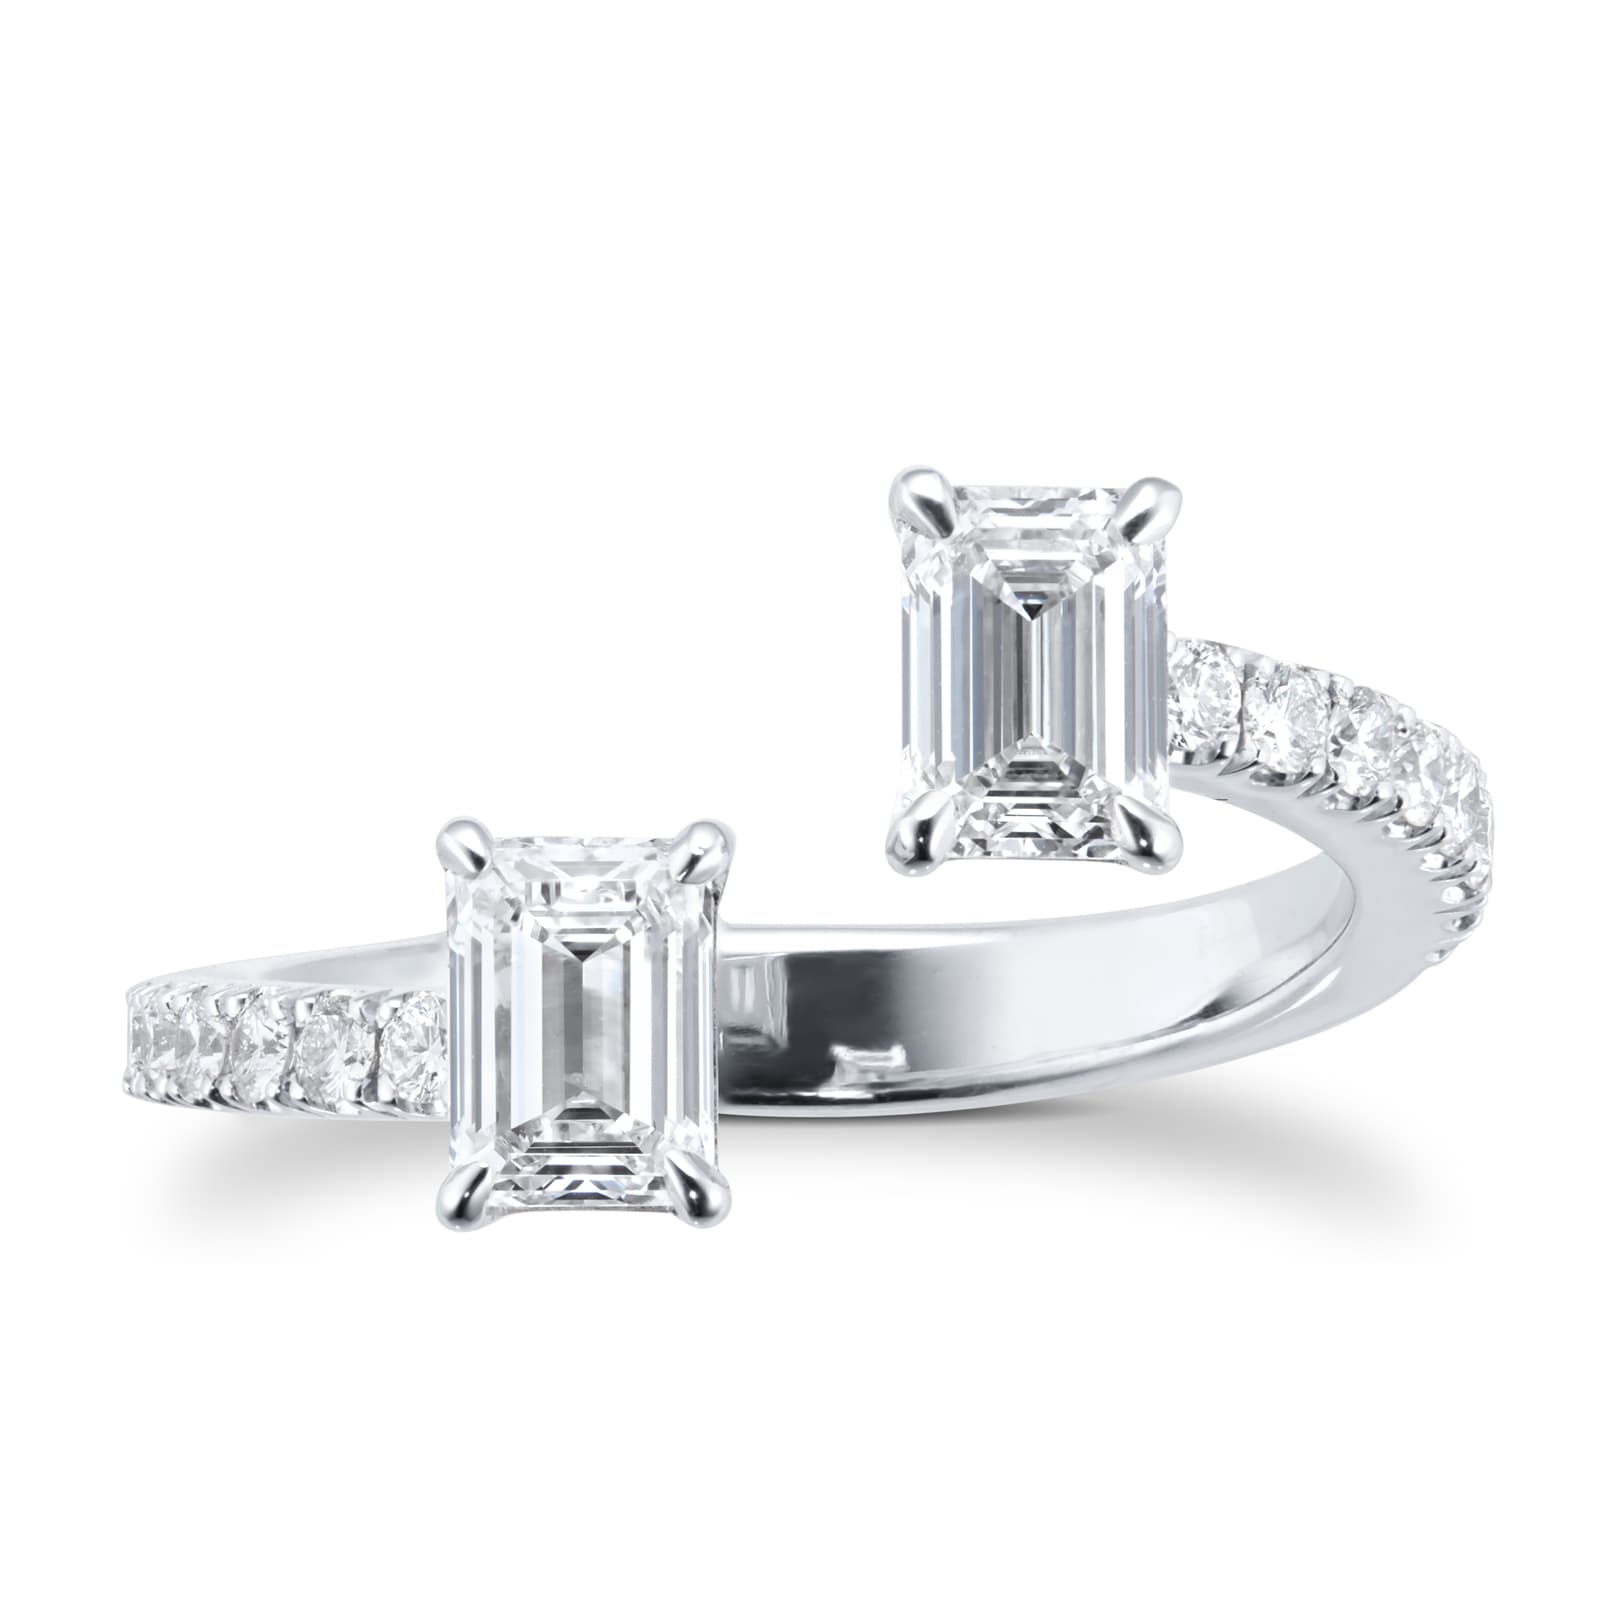 Platinum Toi et Moi 1.20cttw Emerald Cut Ring With Diamond Set Shoulders - Ring Size O